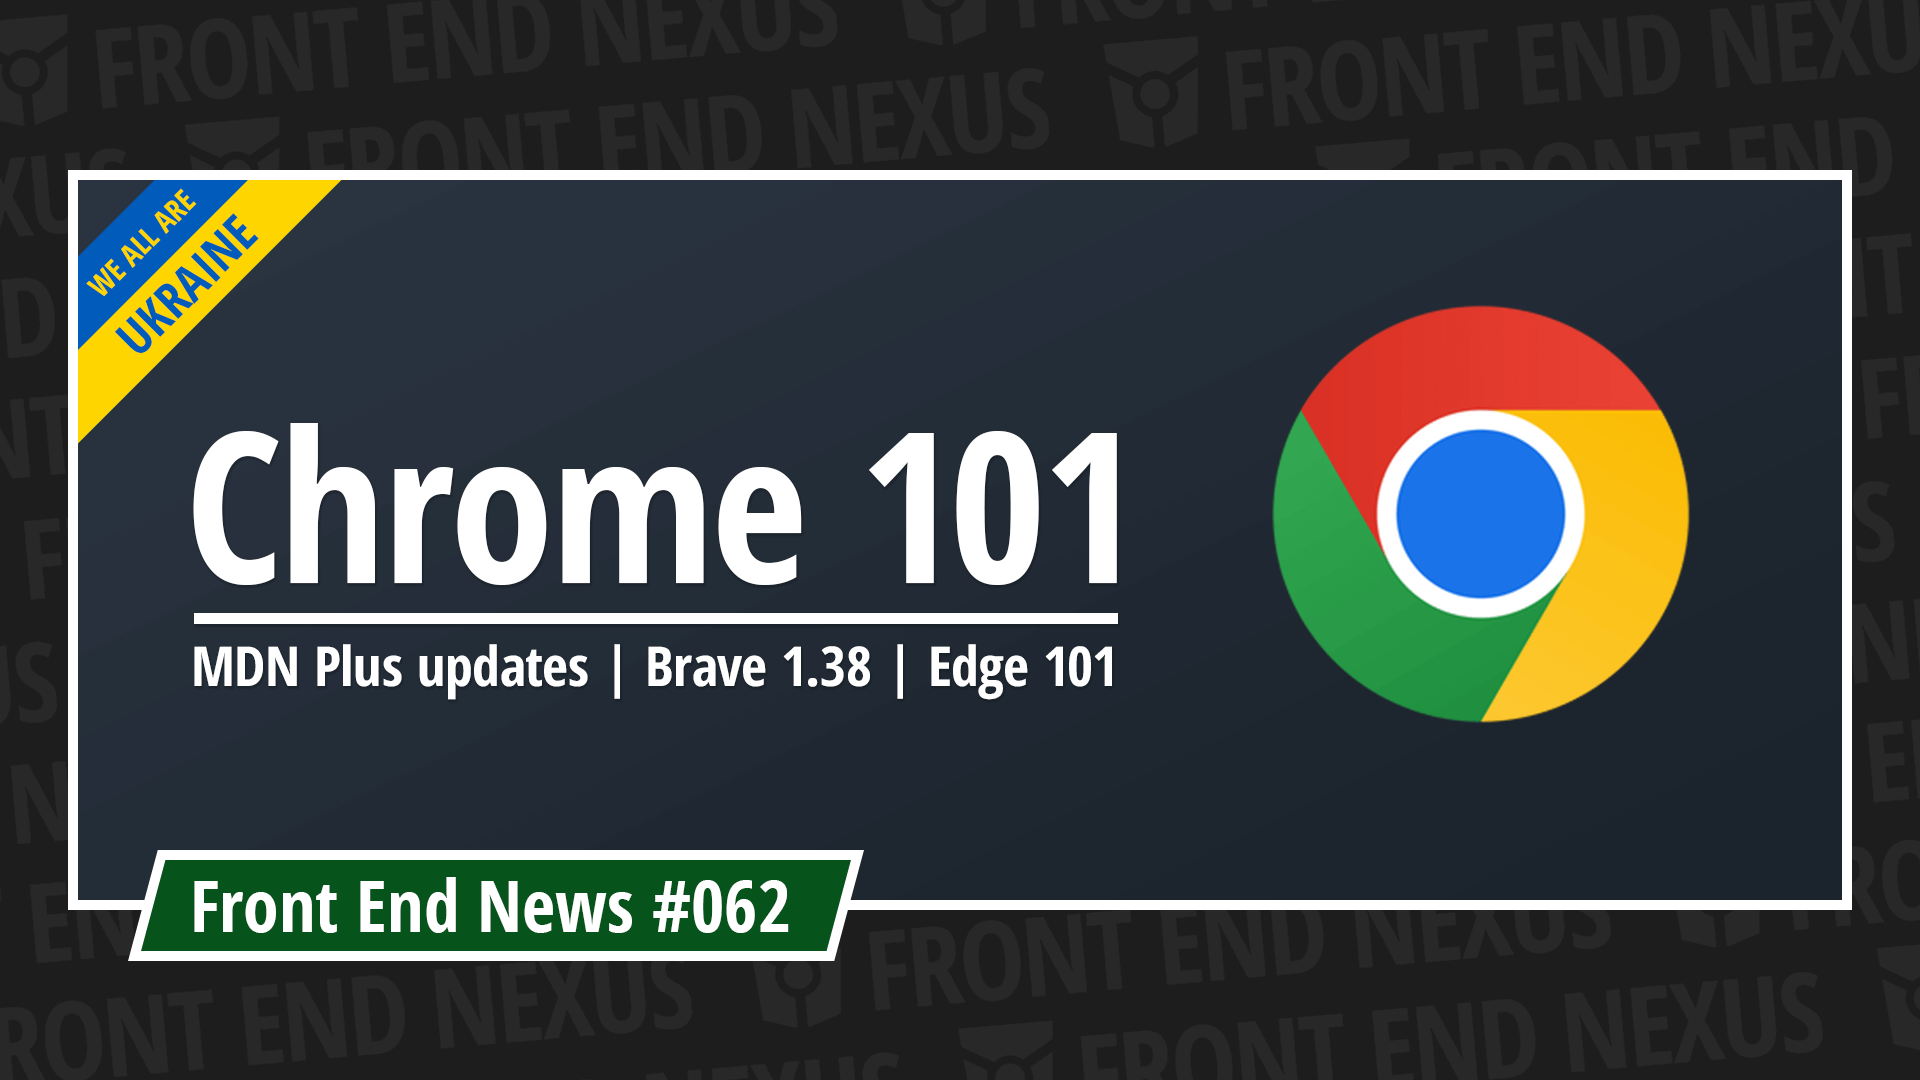 Chrome 101, MDN Plus updates, Brave 1.38, Edge 101, Node v16.15.0 (LTS), React 18.1.0, and more | Front End News #062